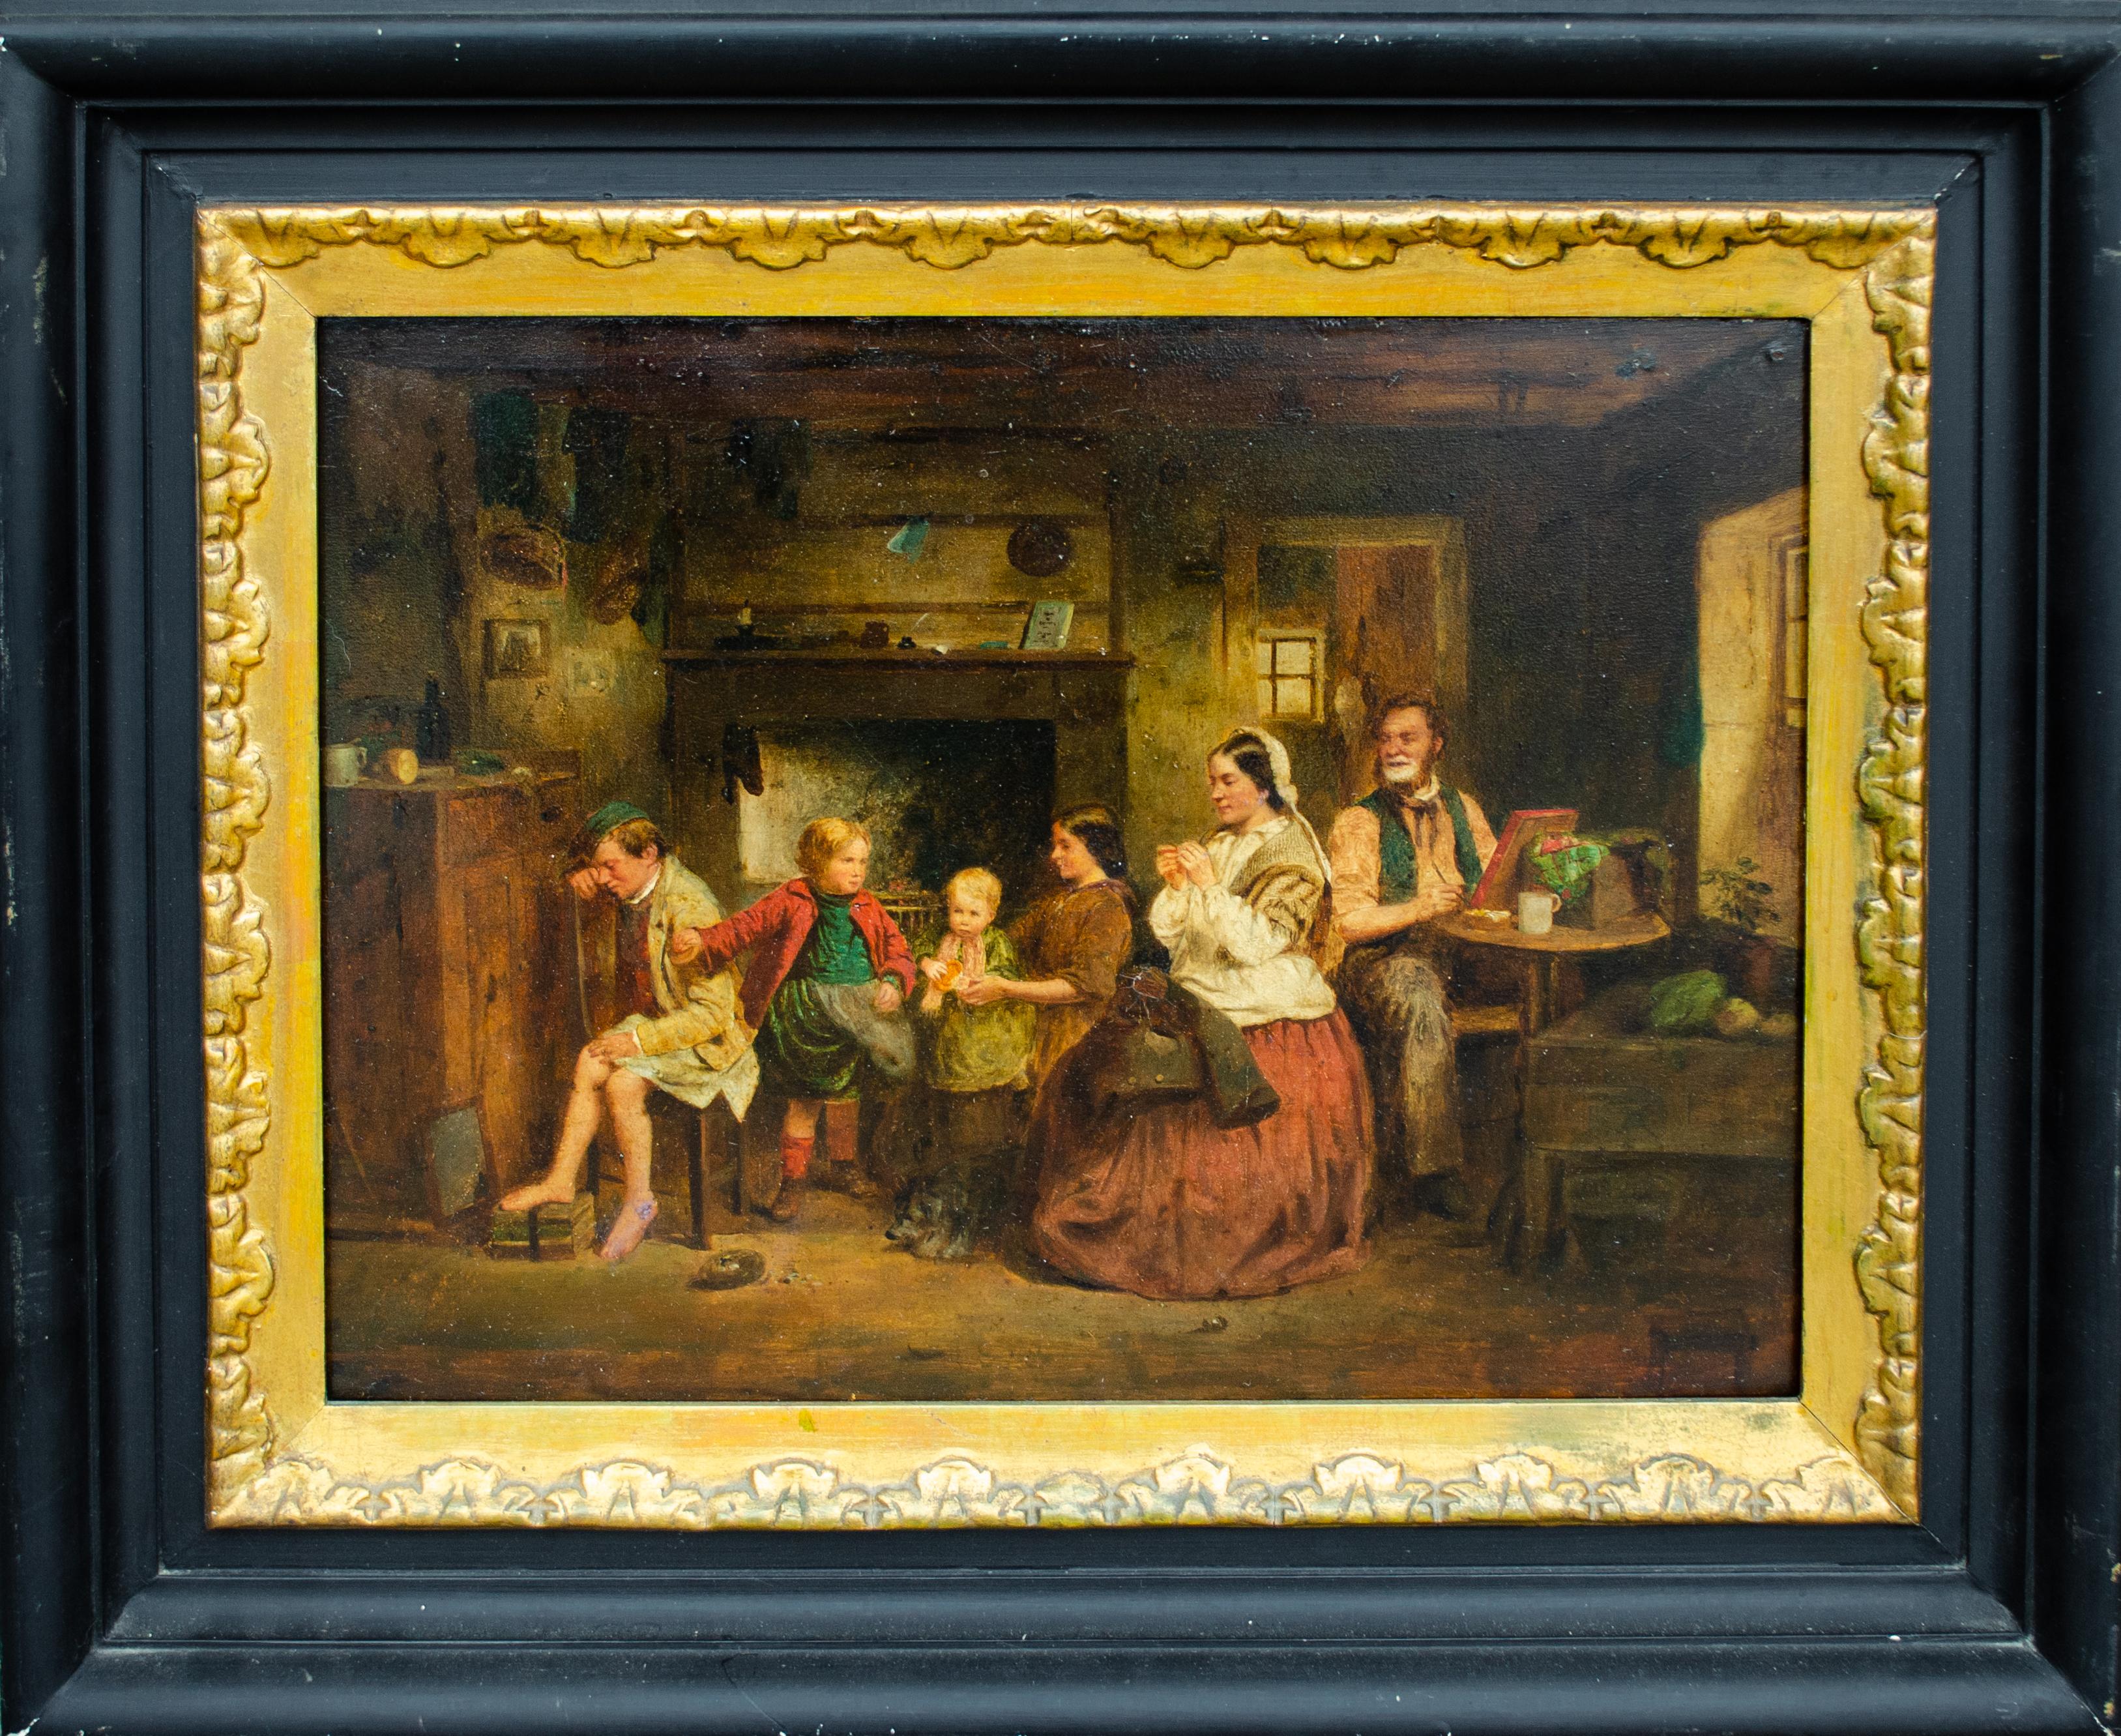 Unknown Figurative Painting - 19th Century British School Painting